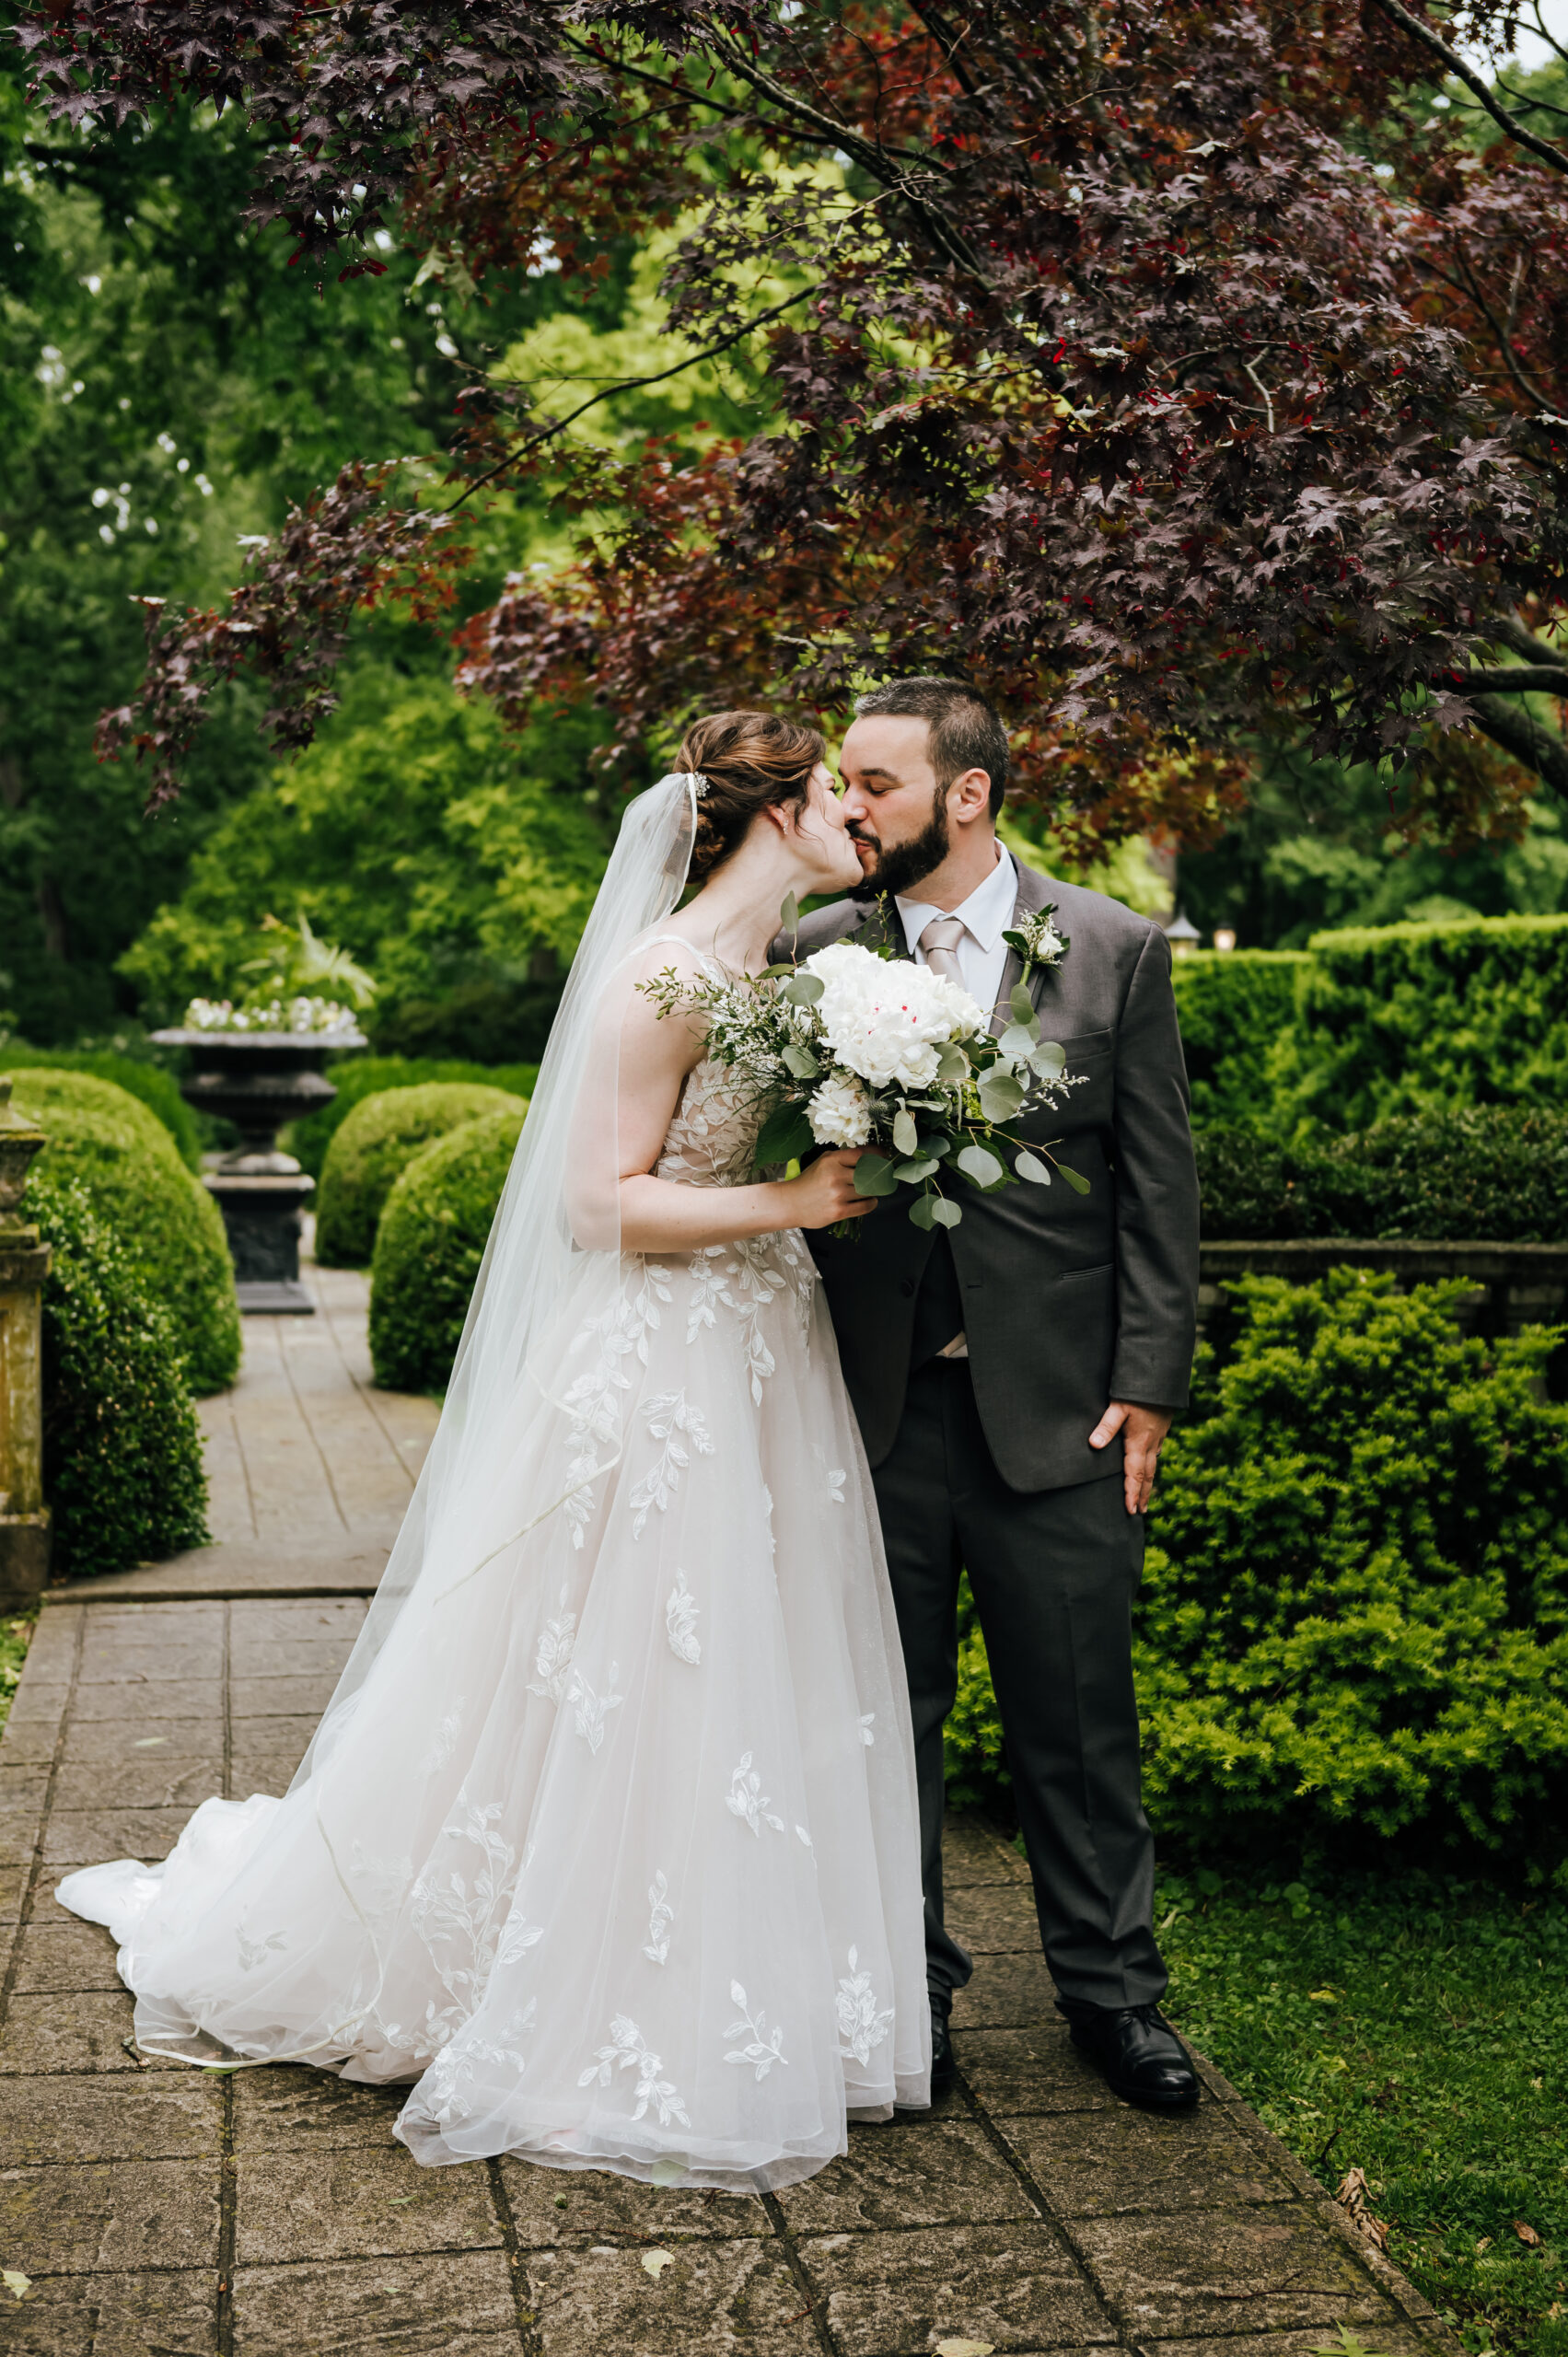 The newlyweds share a kiss in the lush green gardens of Whitehall Mansion